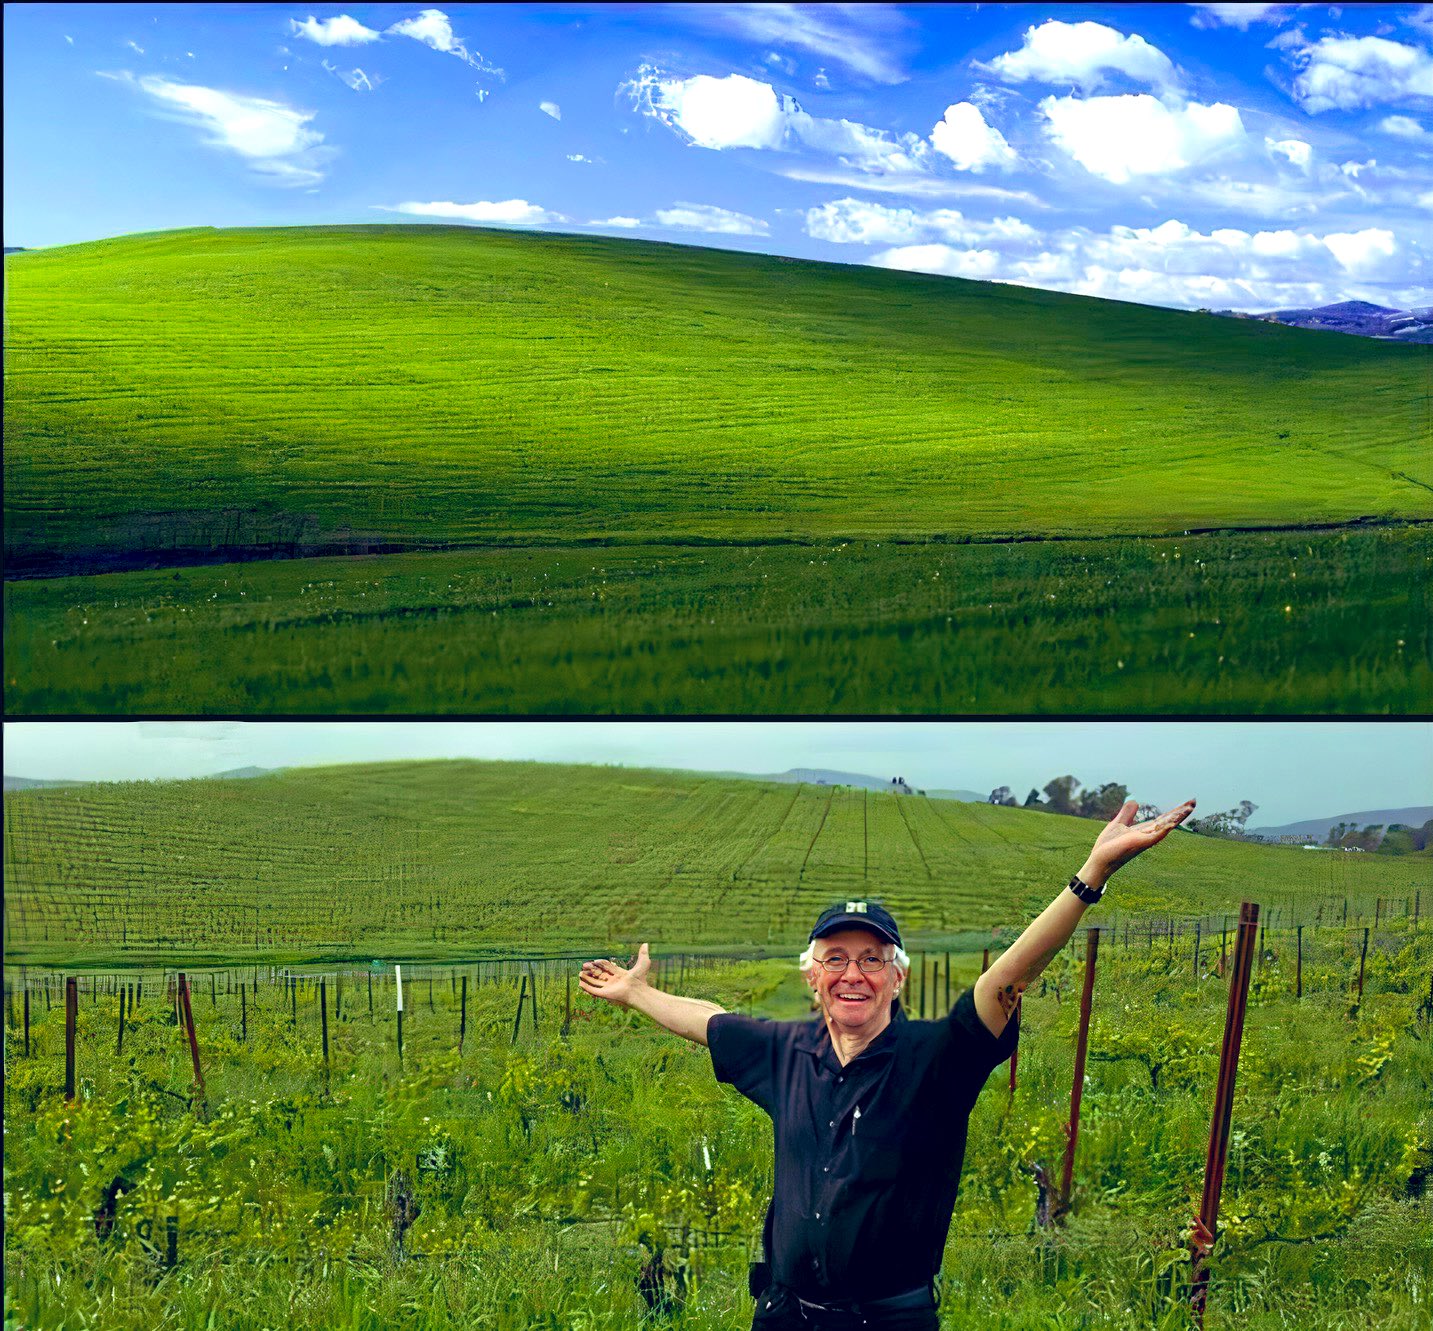 The Story behind the Famous Windows XP Desktop Background